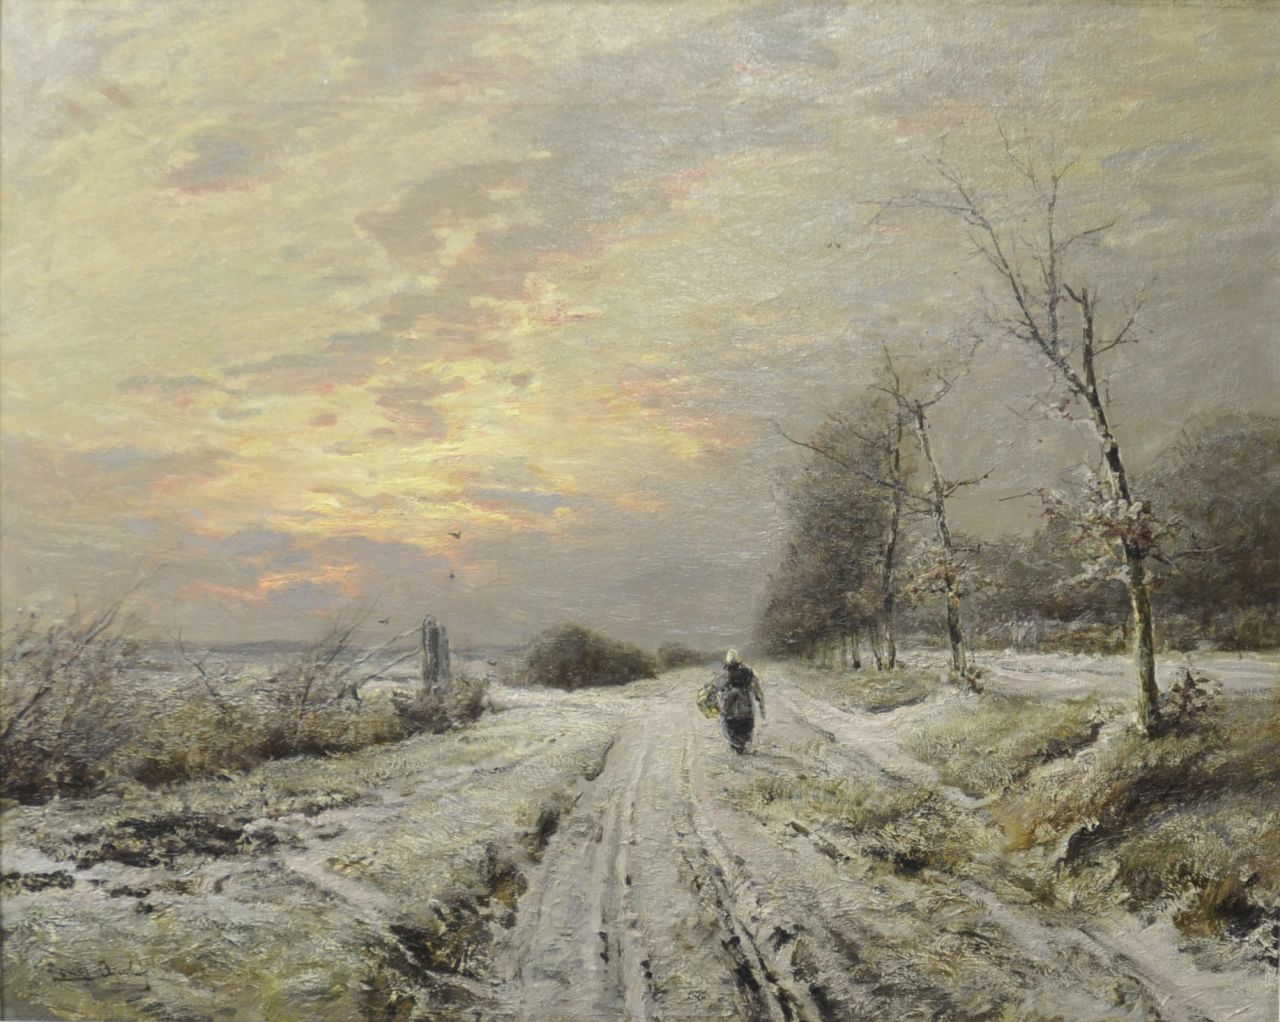 Apol L.F.H.  | Lodewijk Franciscus Hendrik 'Louis' Apol, Winterlandscape with a farmer's wife on a path, oil on canvas 64.3 x 80.2 cm, signed l.l.